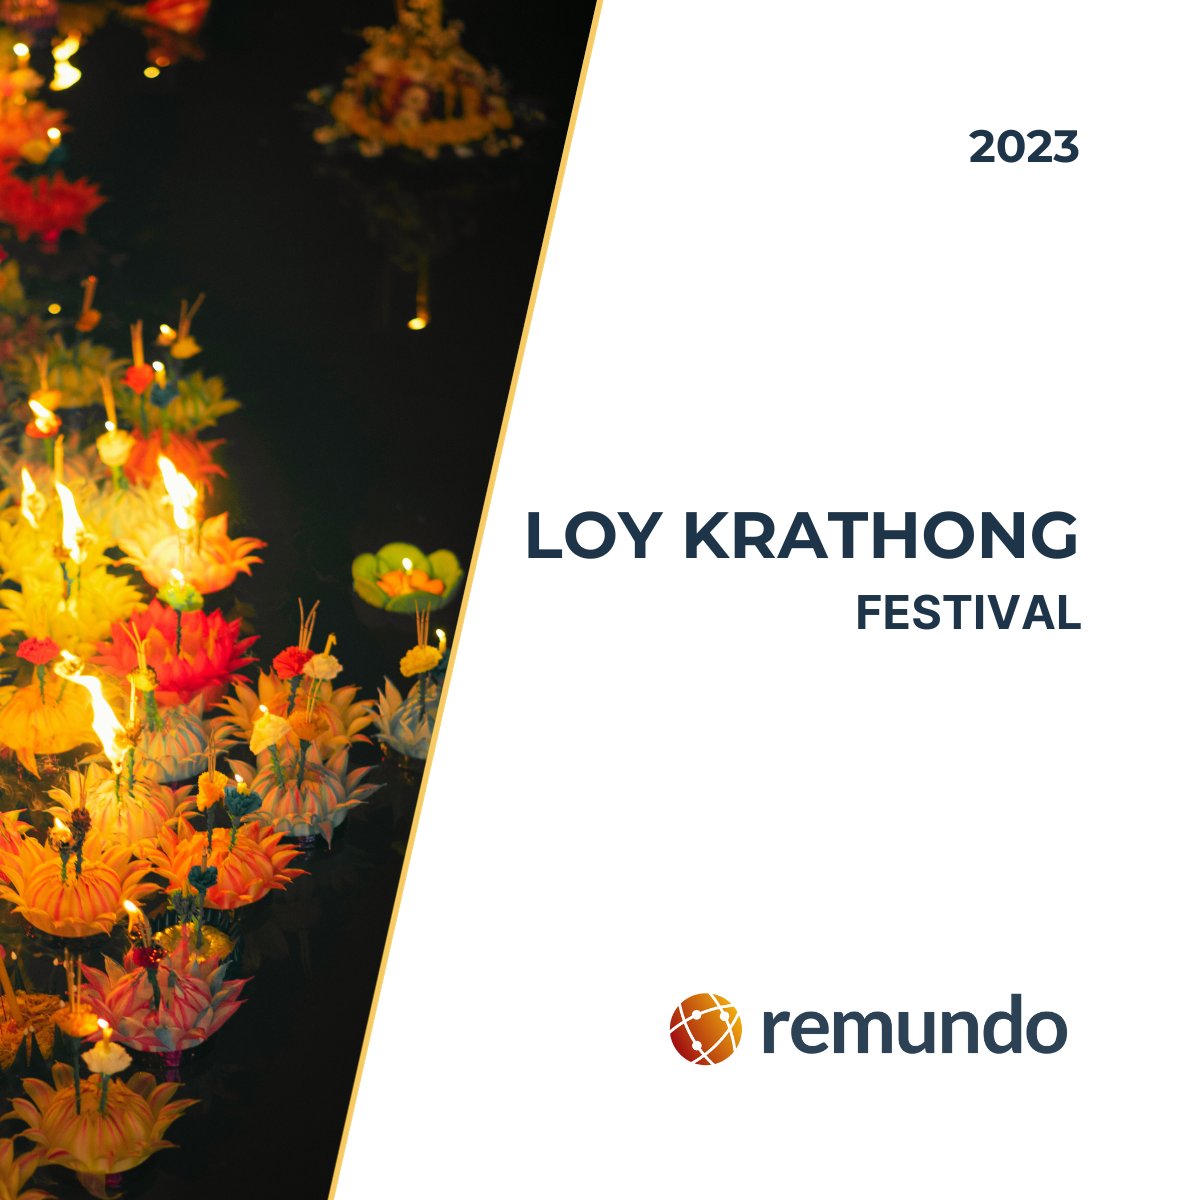 May this festival of lights bring joy, prosperity, and happiness to you and your loved ones.  Wishing you a memorable and enchanting Loy Krathong! 

#LoyKrathong #FestivalOfLights #TraditionAndUnity #JoyfulCelebration